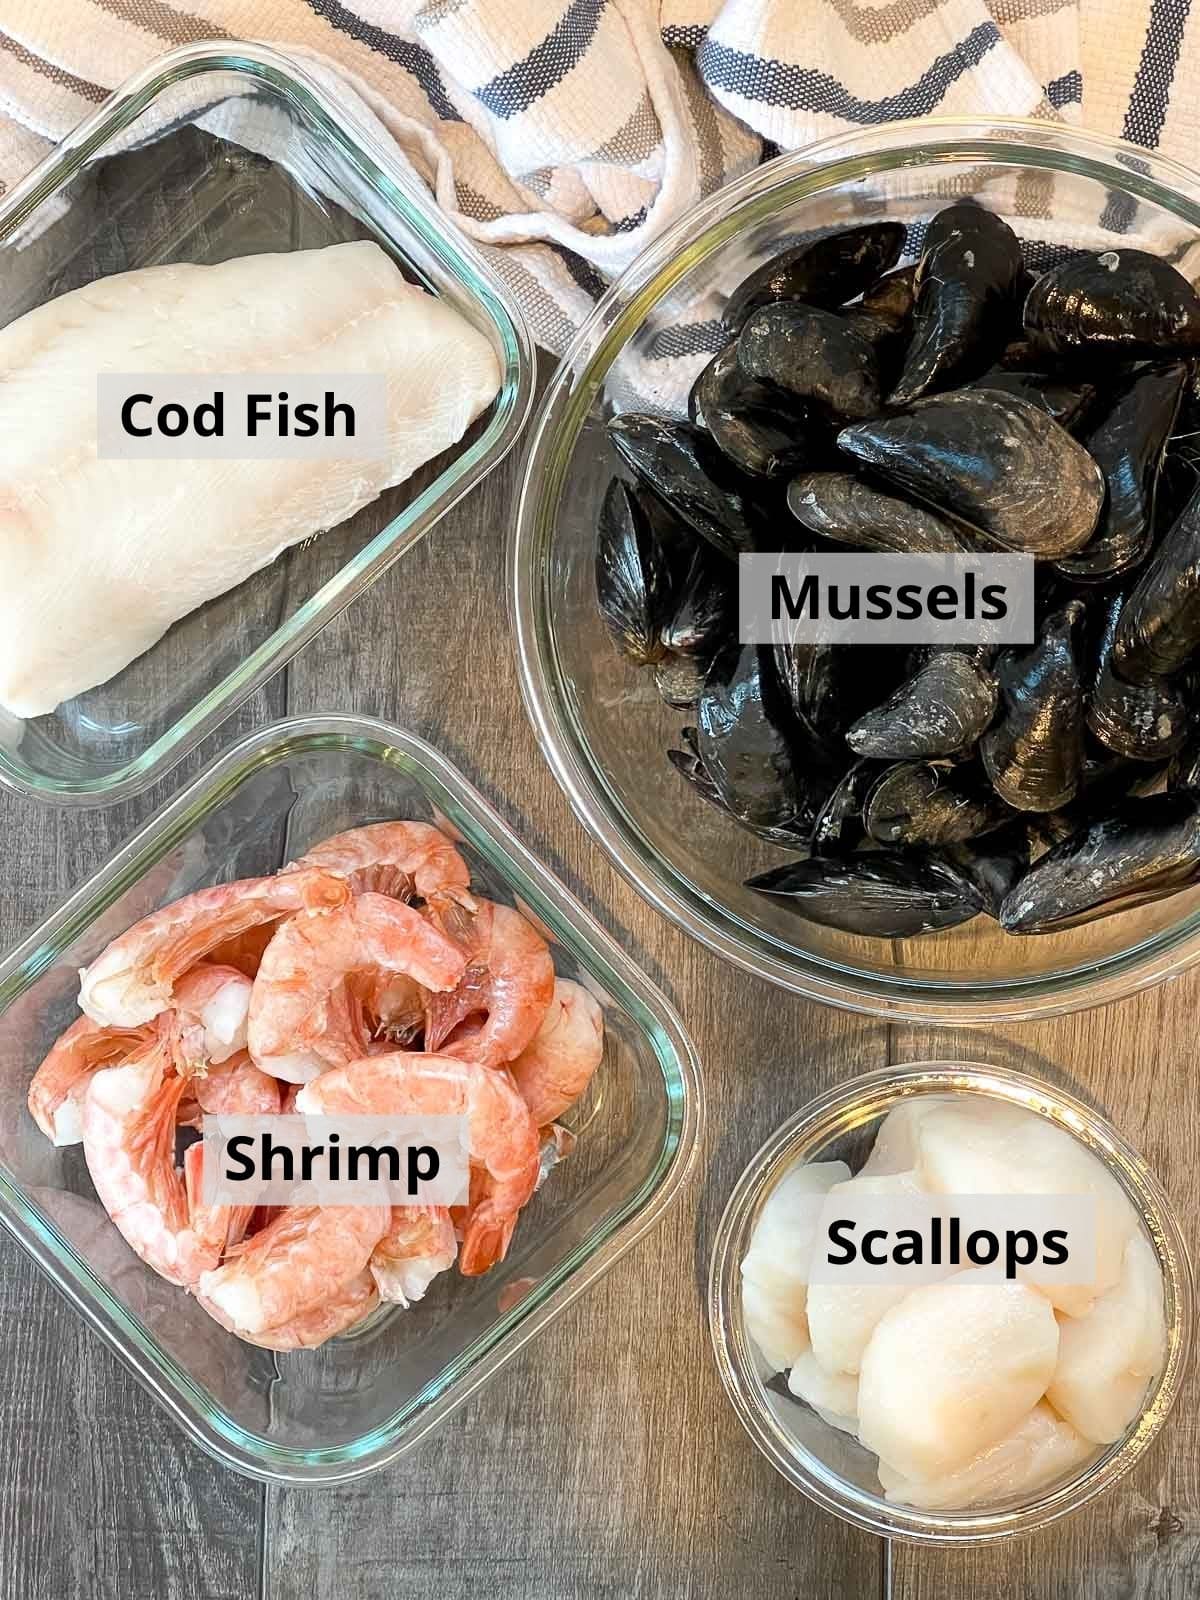 Fresh cod fish, mussels, shrimp, and scallops in separate glass bowls on top of a wooden plank board.